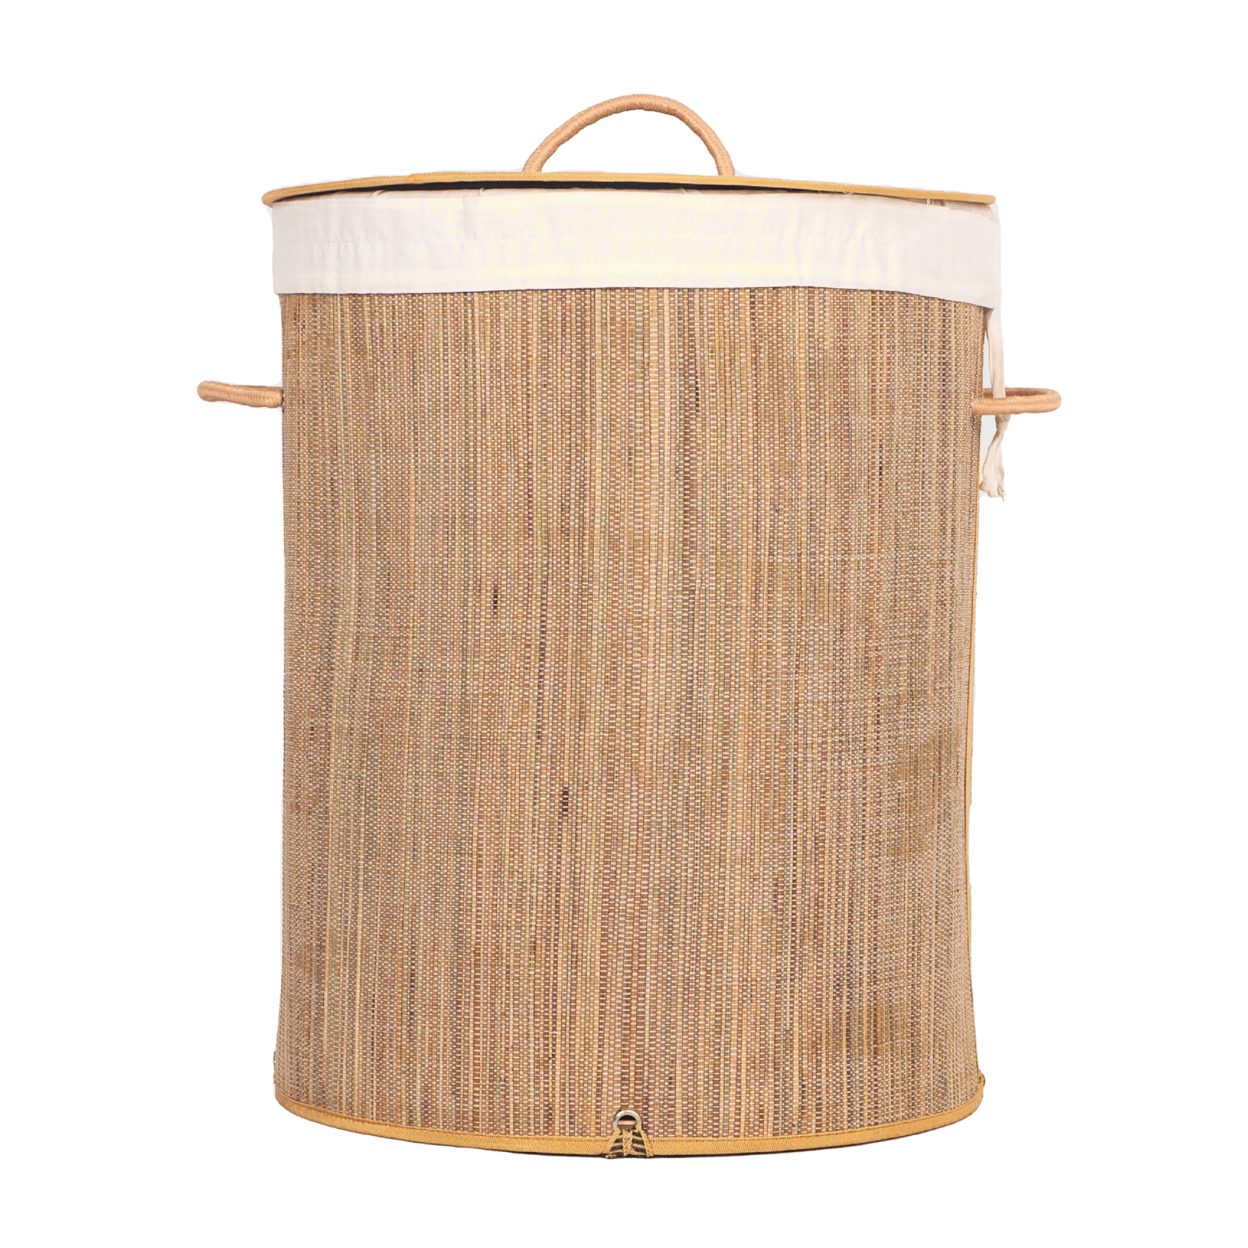 Foldable Laundry Hamper With Lid And Handles For Easy Carrying - Mendong Round